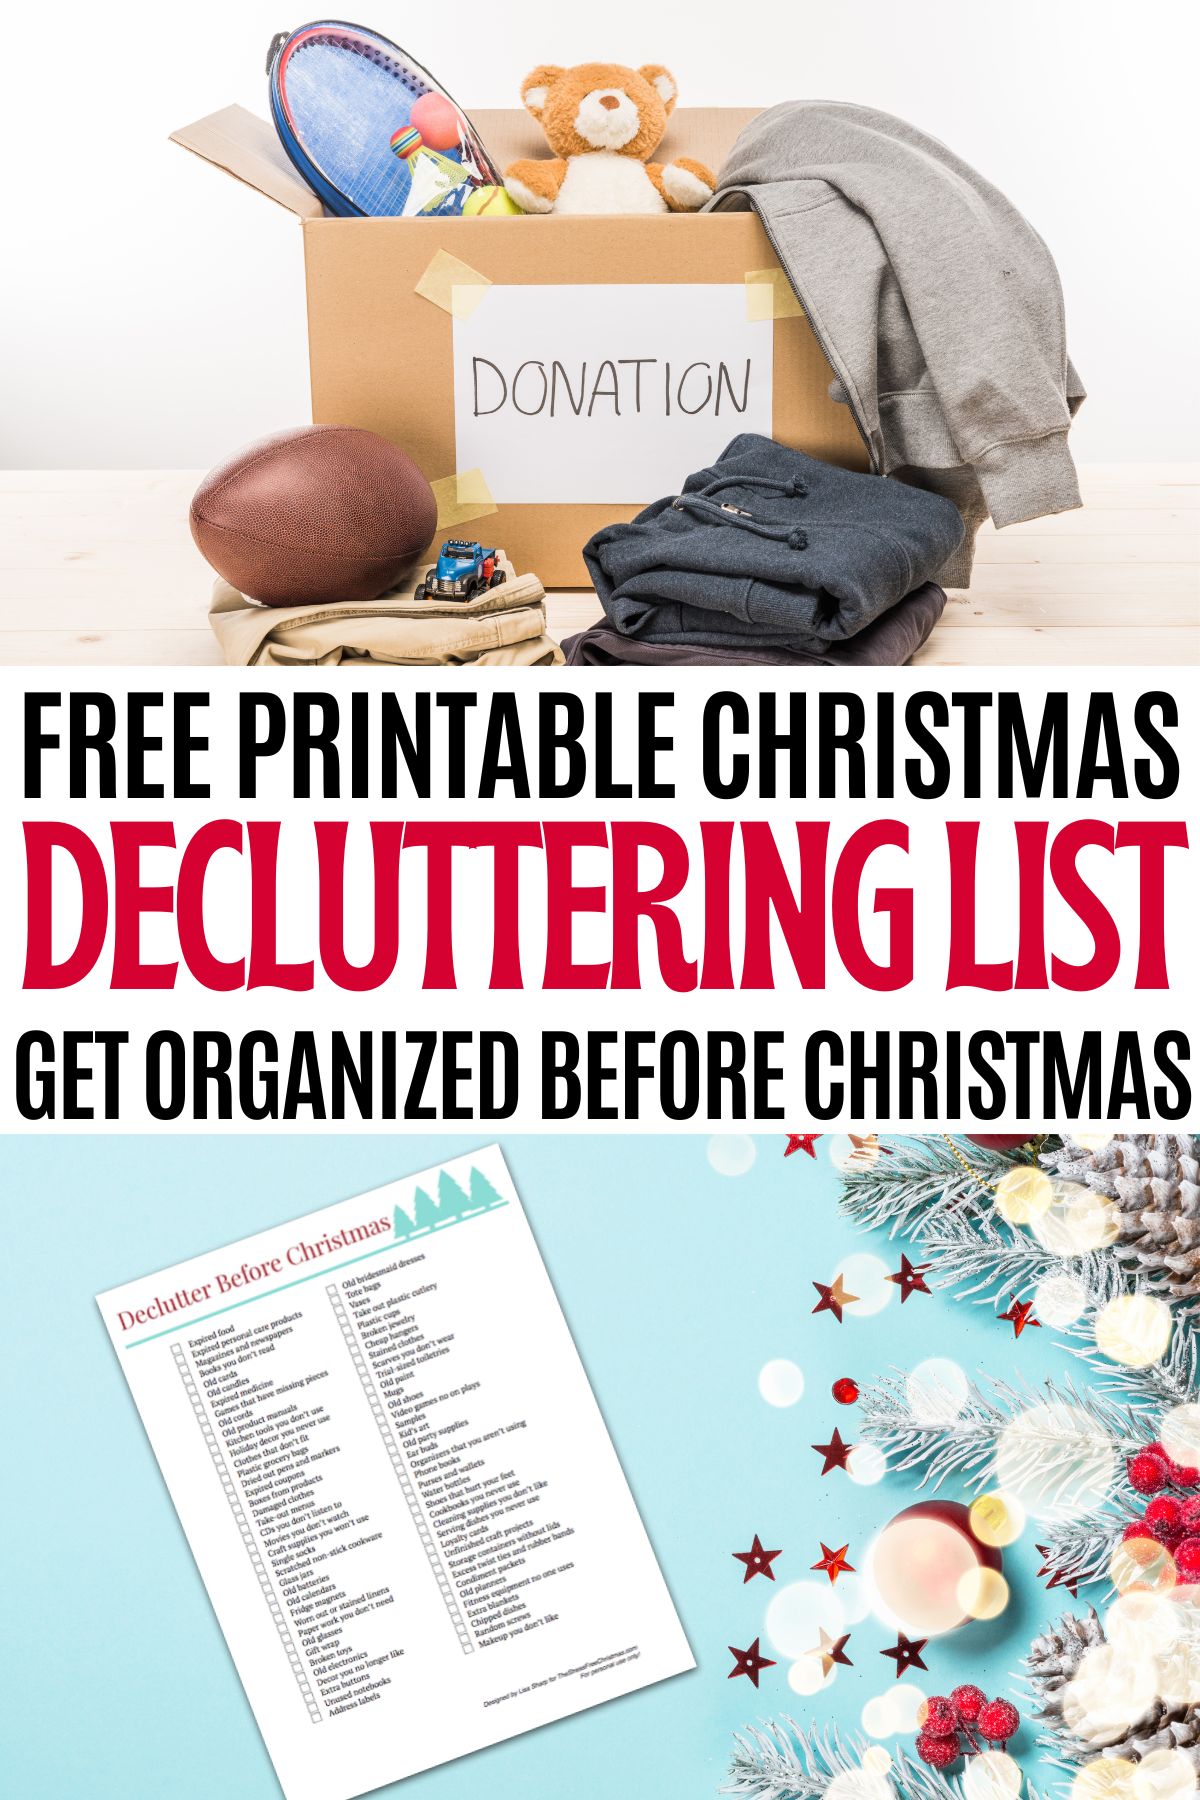 photo of donation box filled with toys and clothes and a decluttering check list on a table with christmas decor, text that reads free printable Christmas decluttering list.